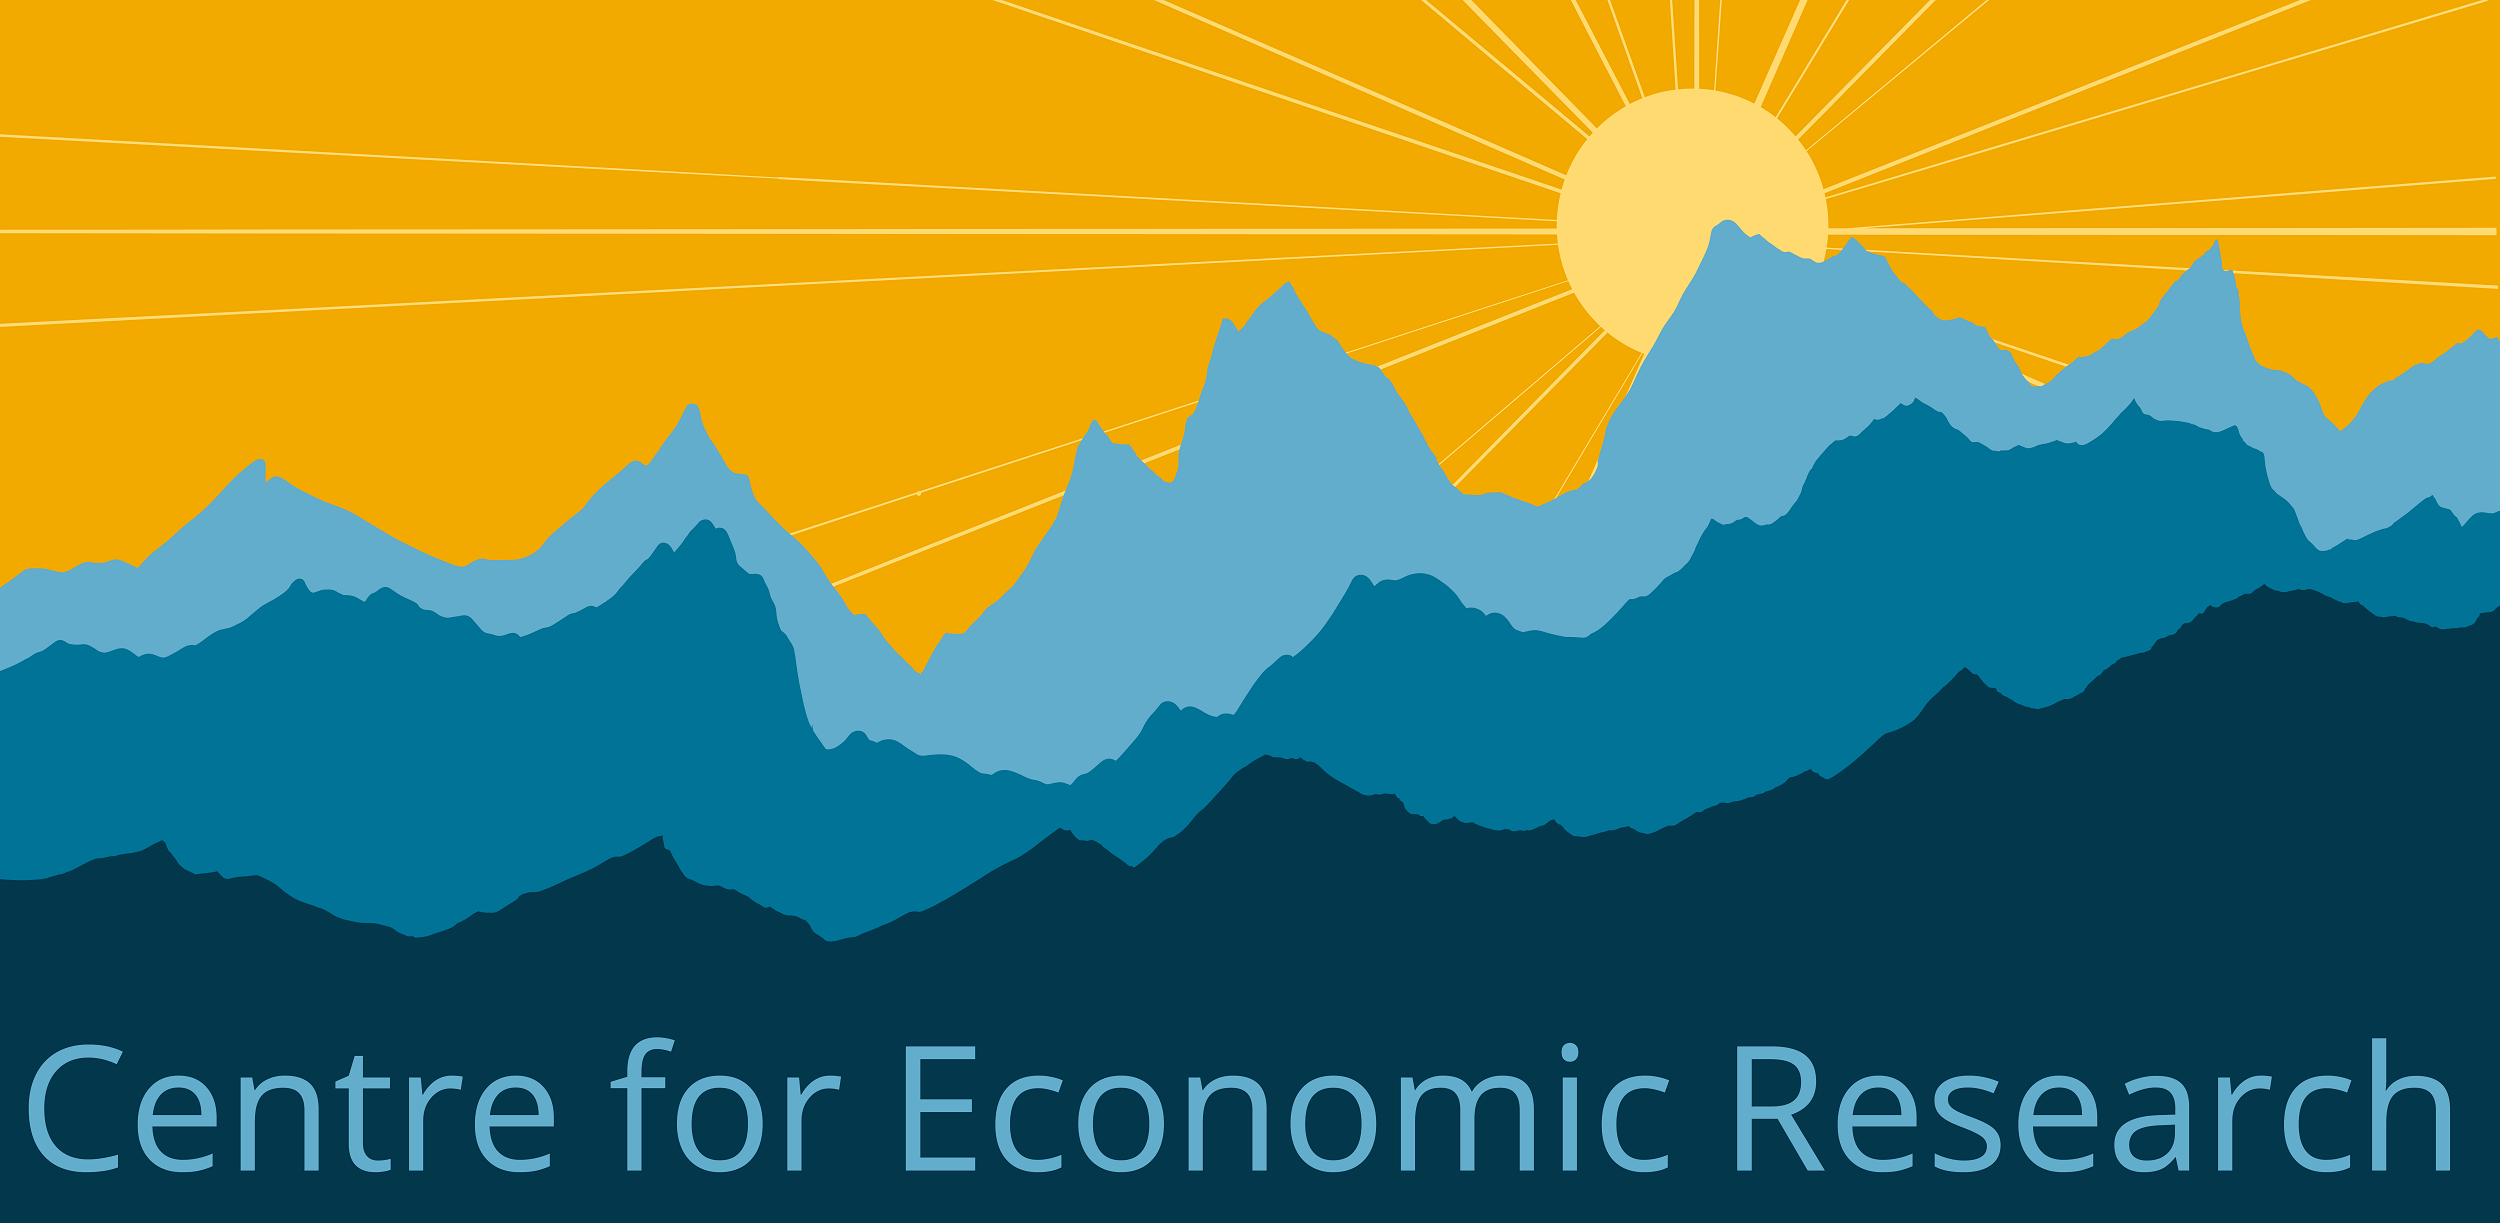 Center for Economic Research